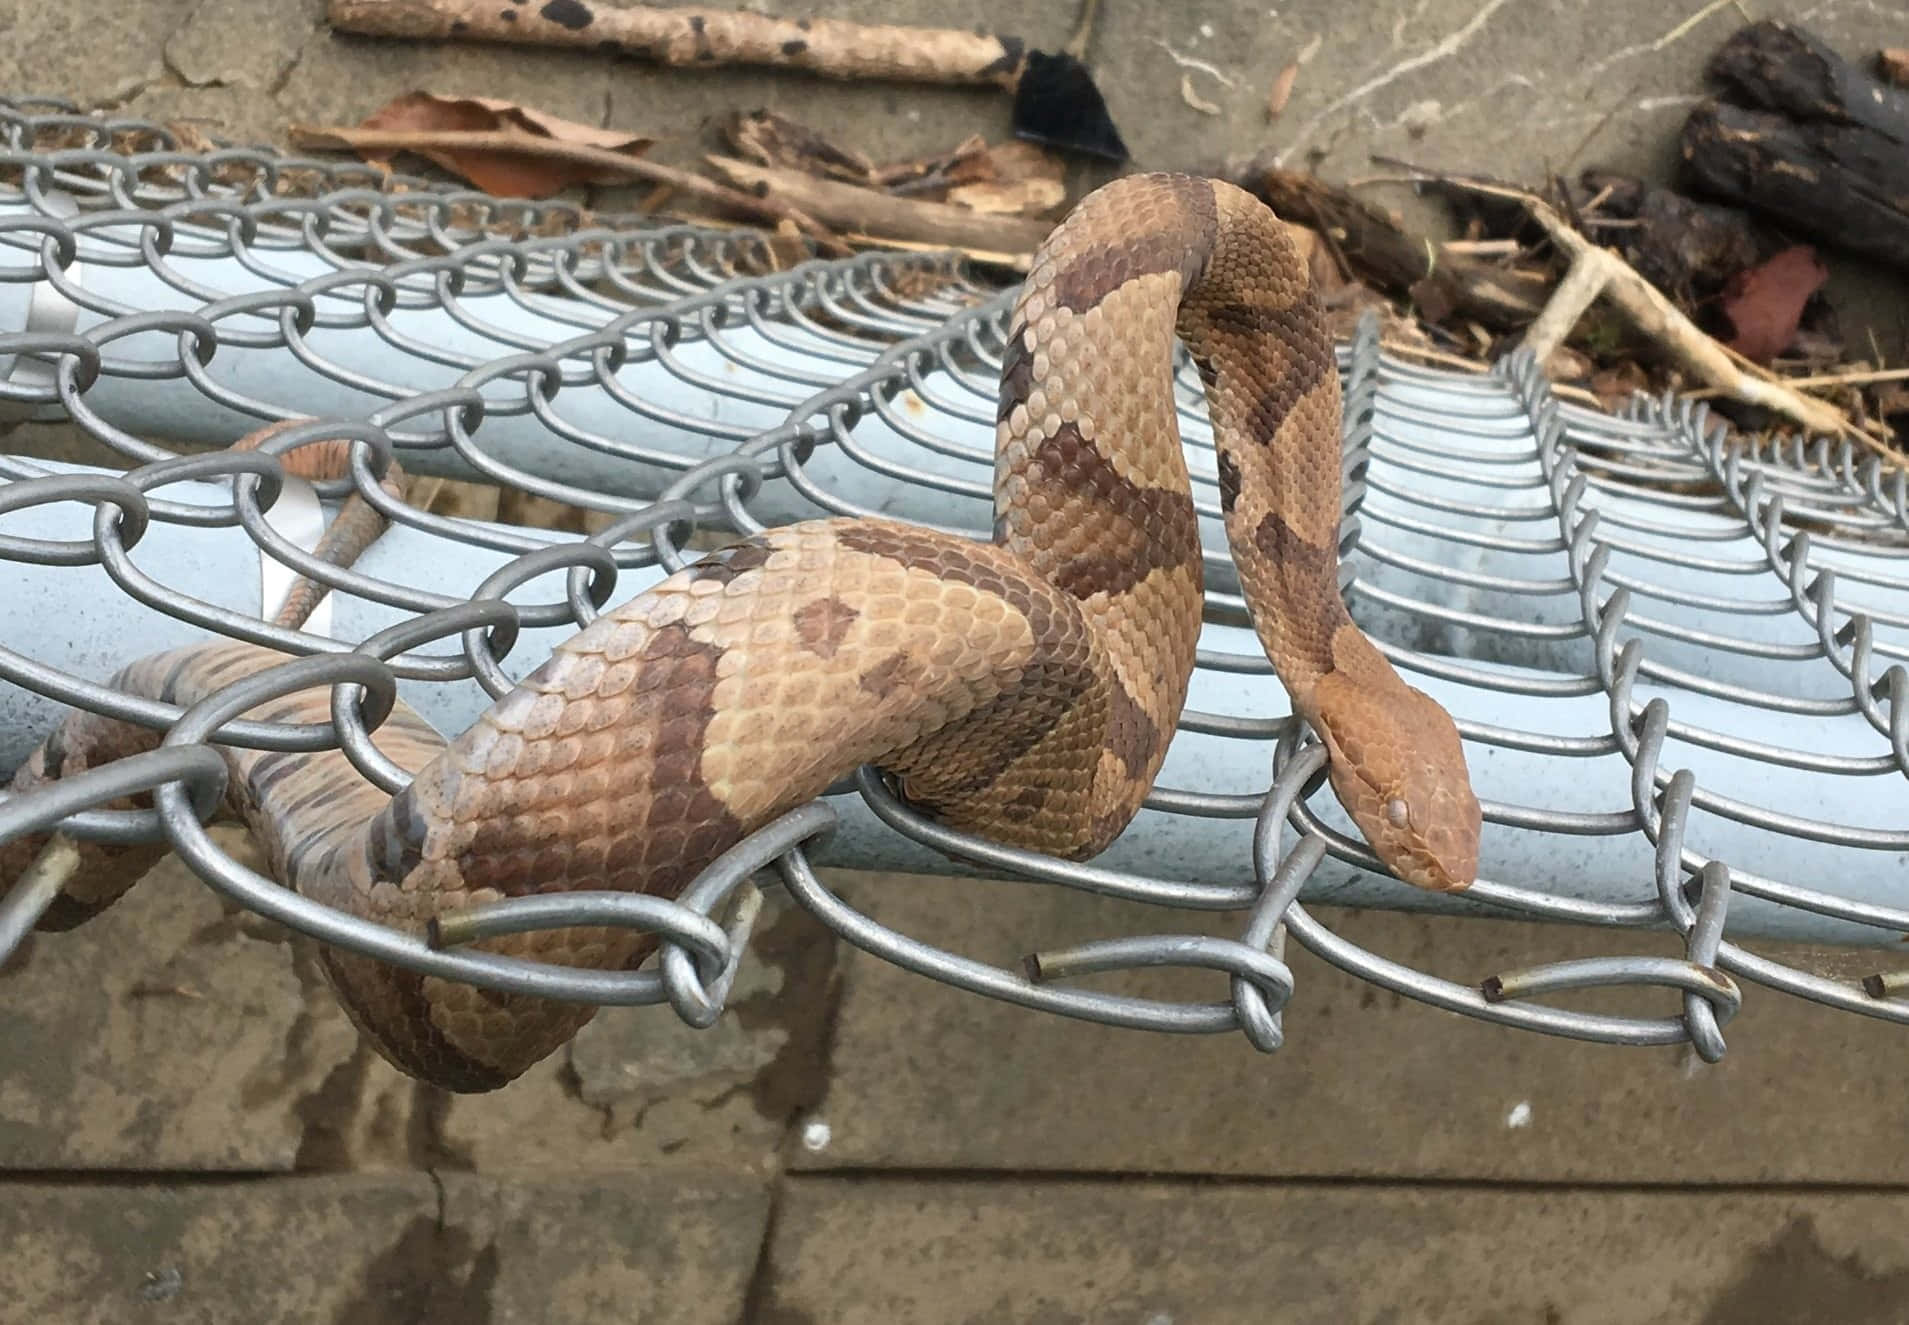 A Copperhead Snake in its Natural Habitat